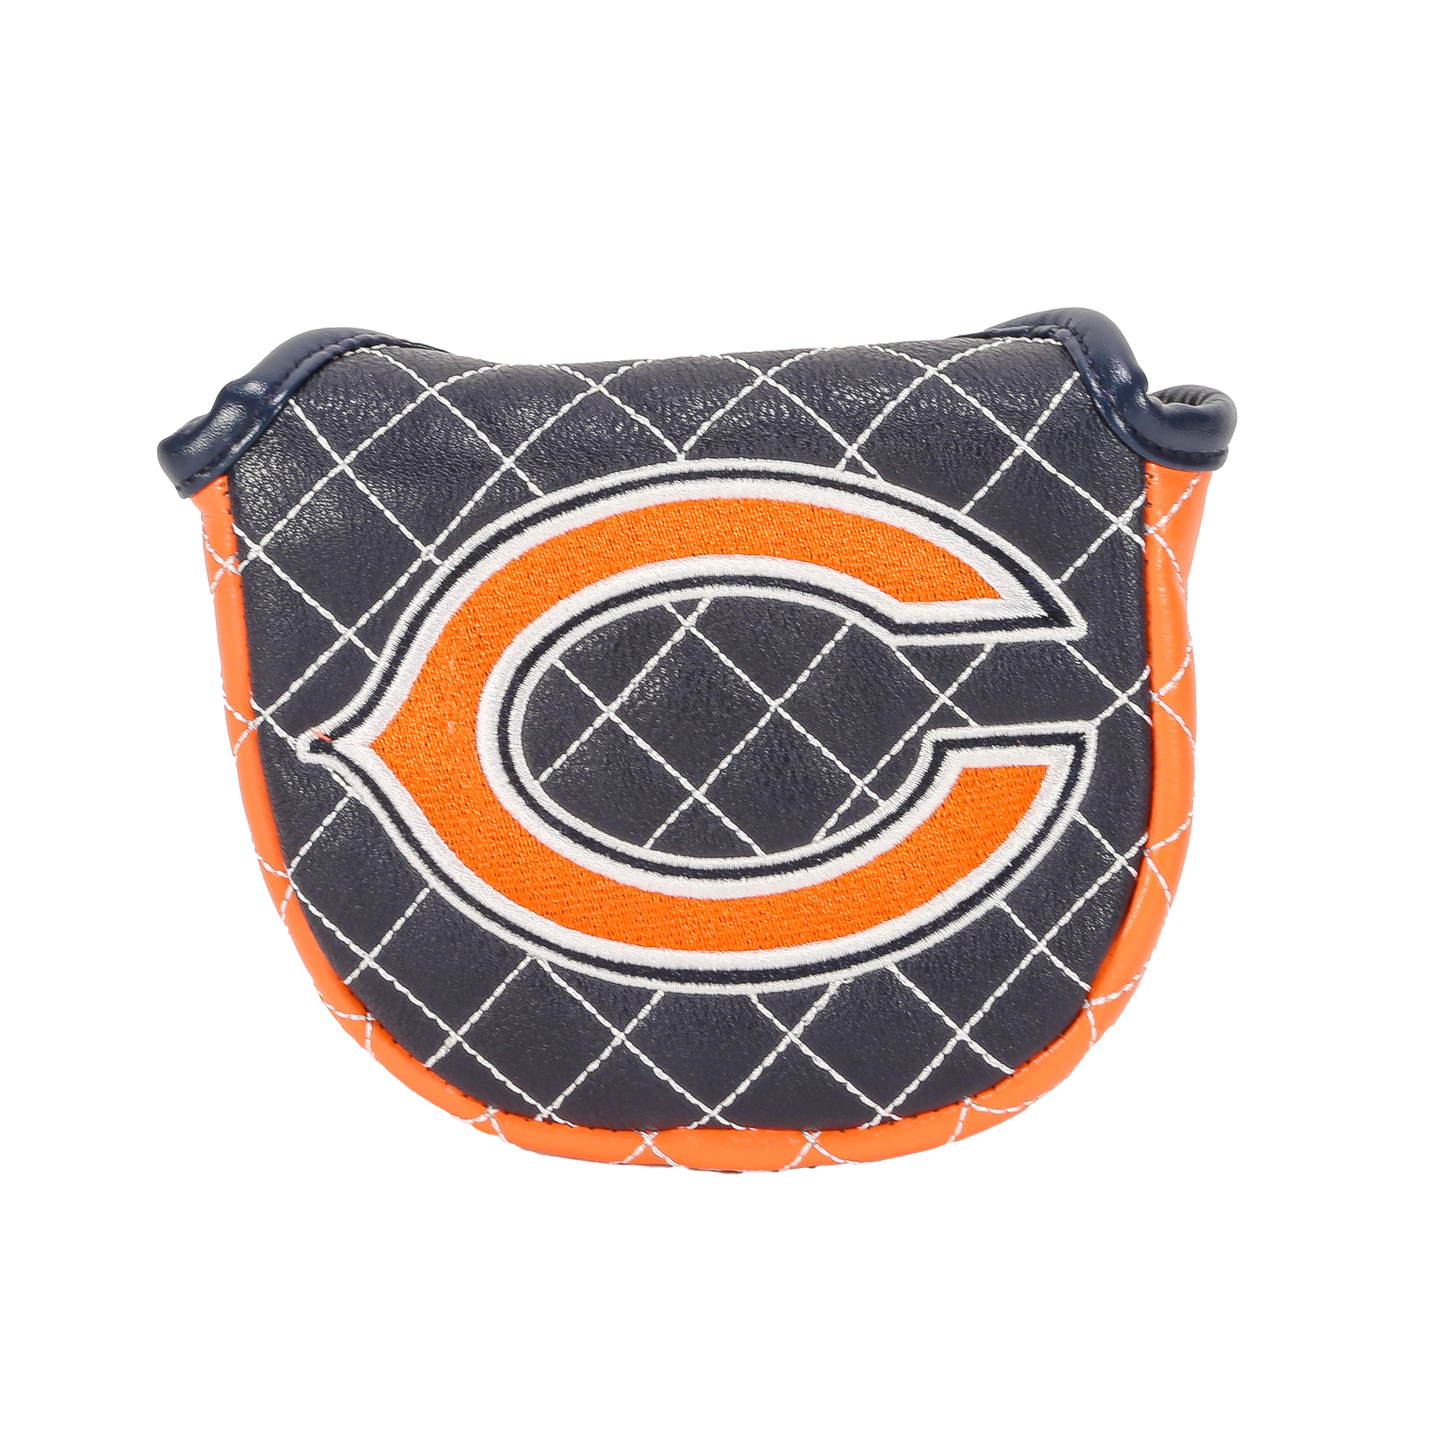 Chicago "Bears" Mallet Putter Cover